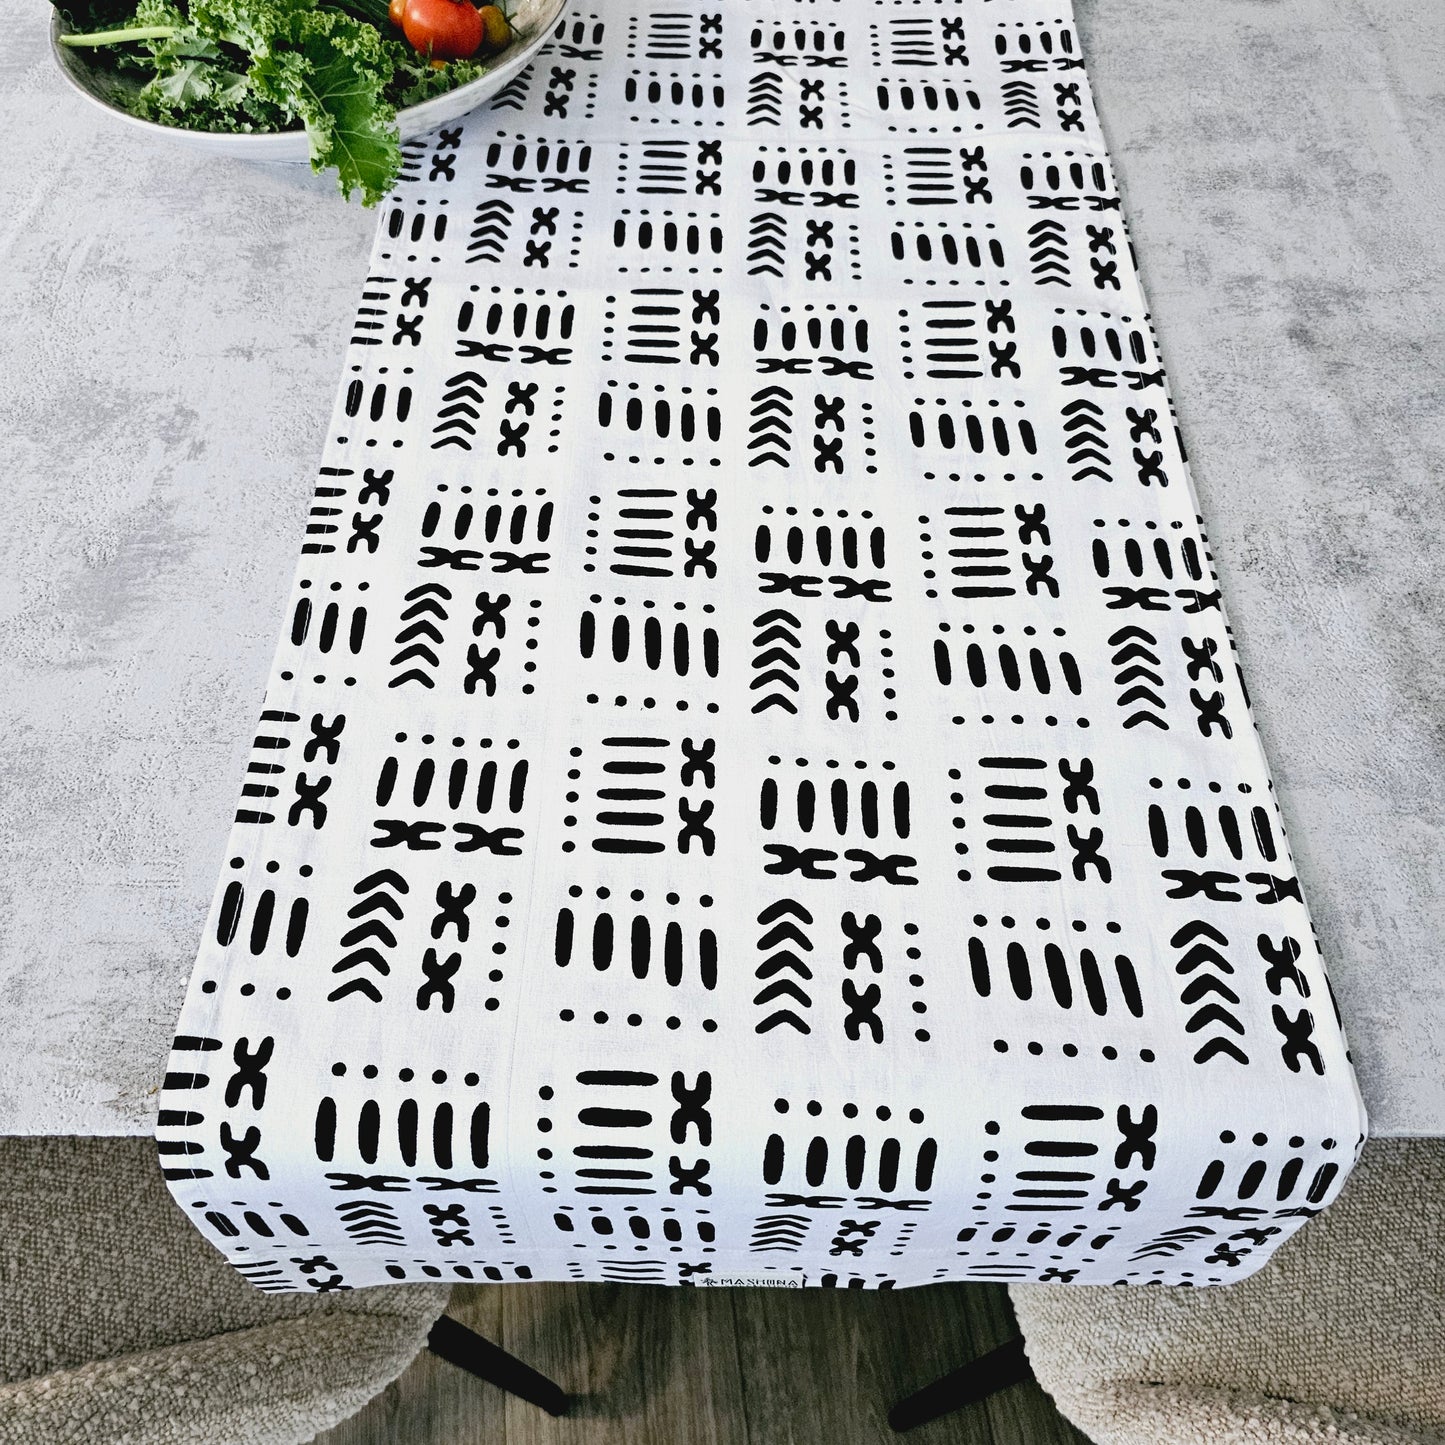 Copy of Handmade African Print "Mudcloth" Bogolan Inspired Print Table Runner Made from 100% African Print Fabric